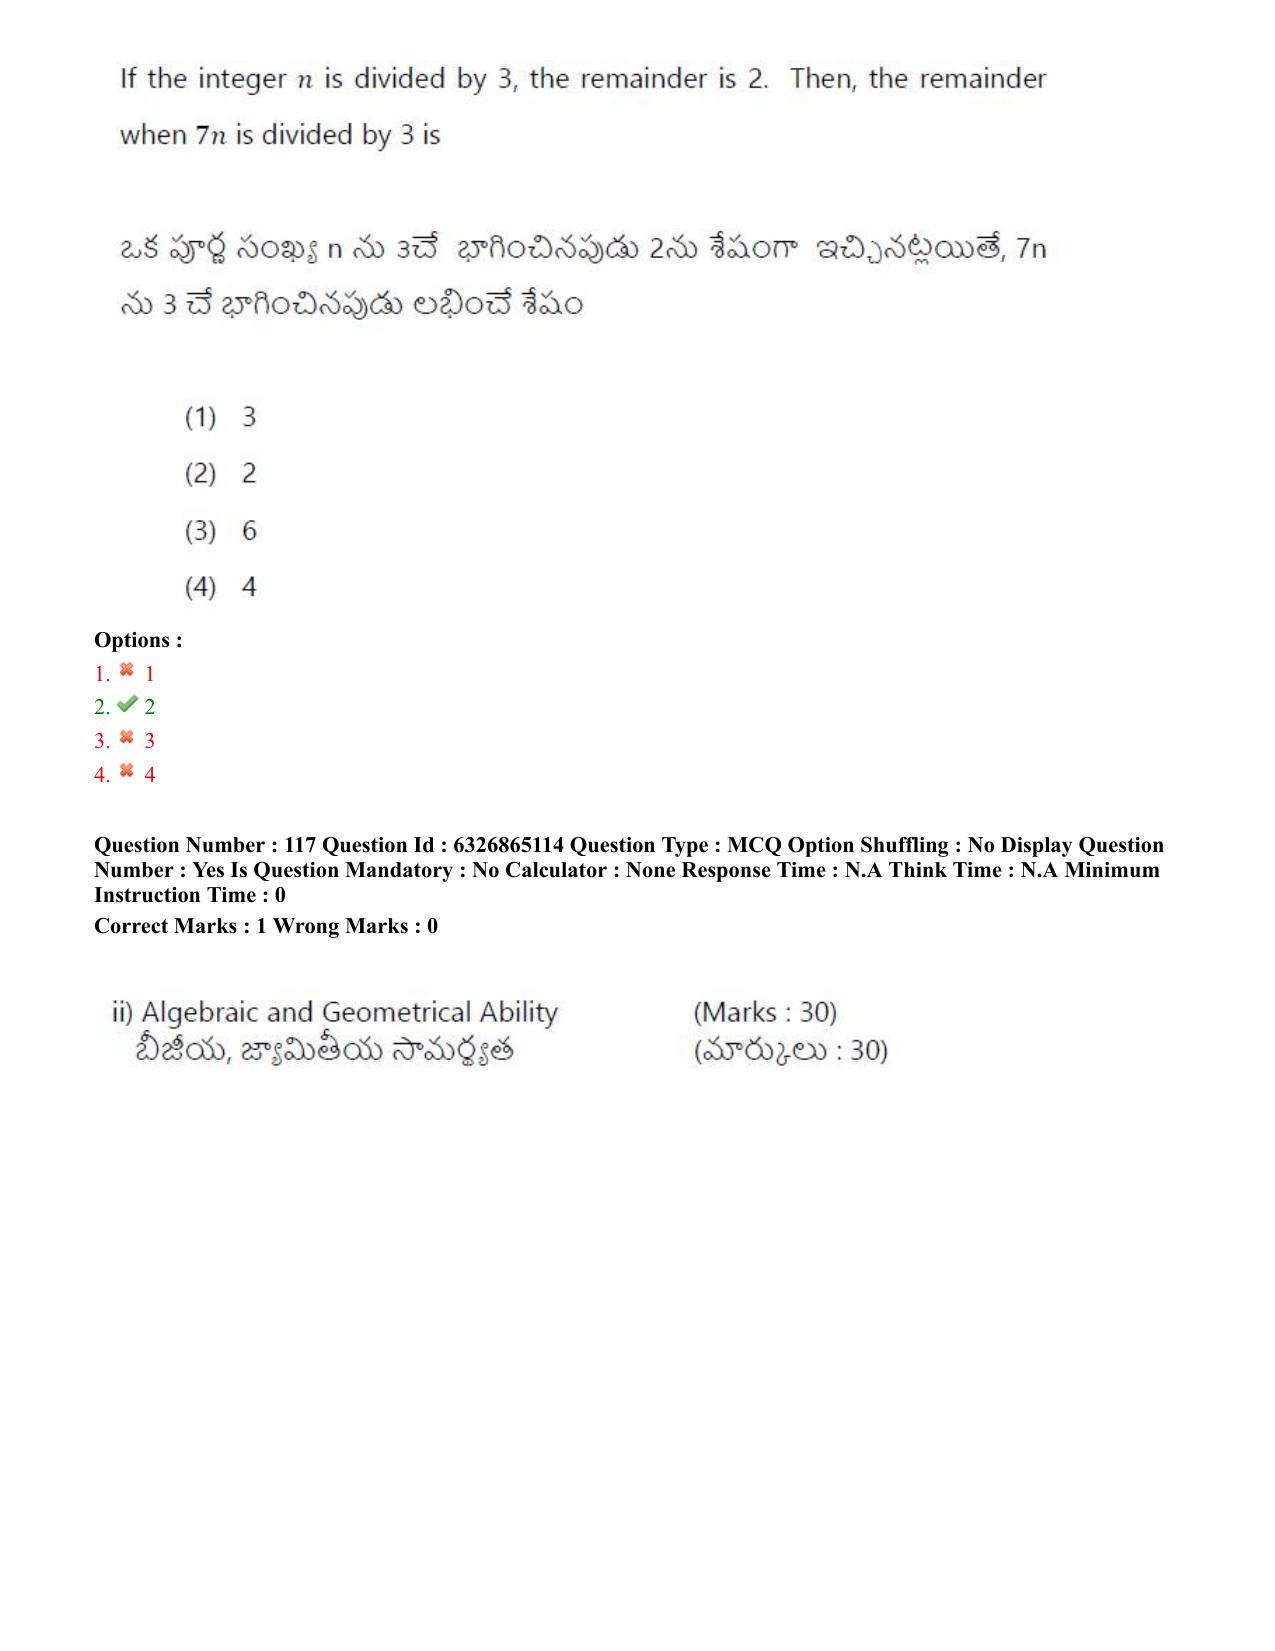 TS ICET 2022 Question Paper 2 - Jul 28, 2022	 - Page 110